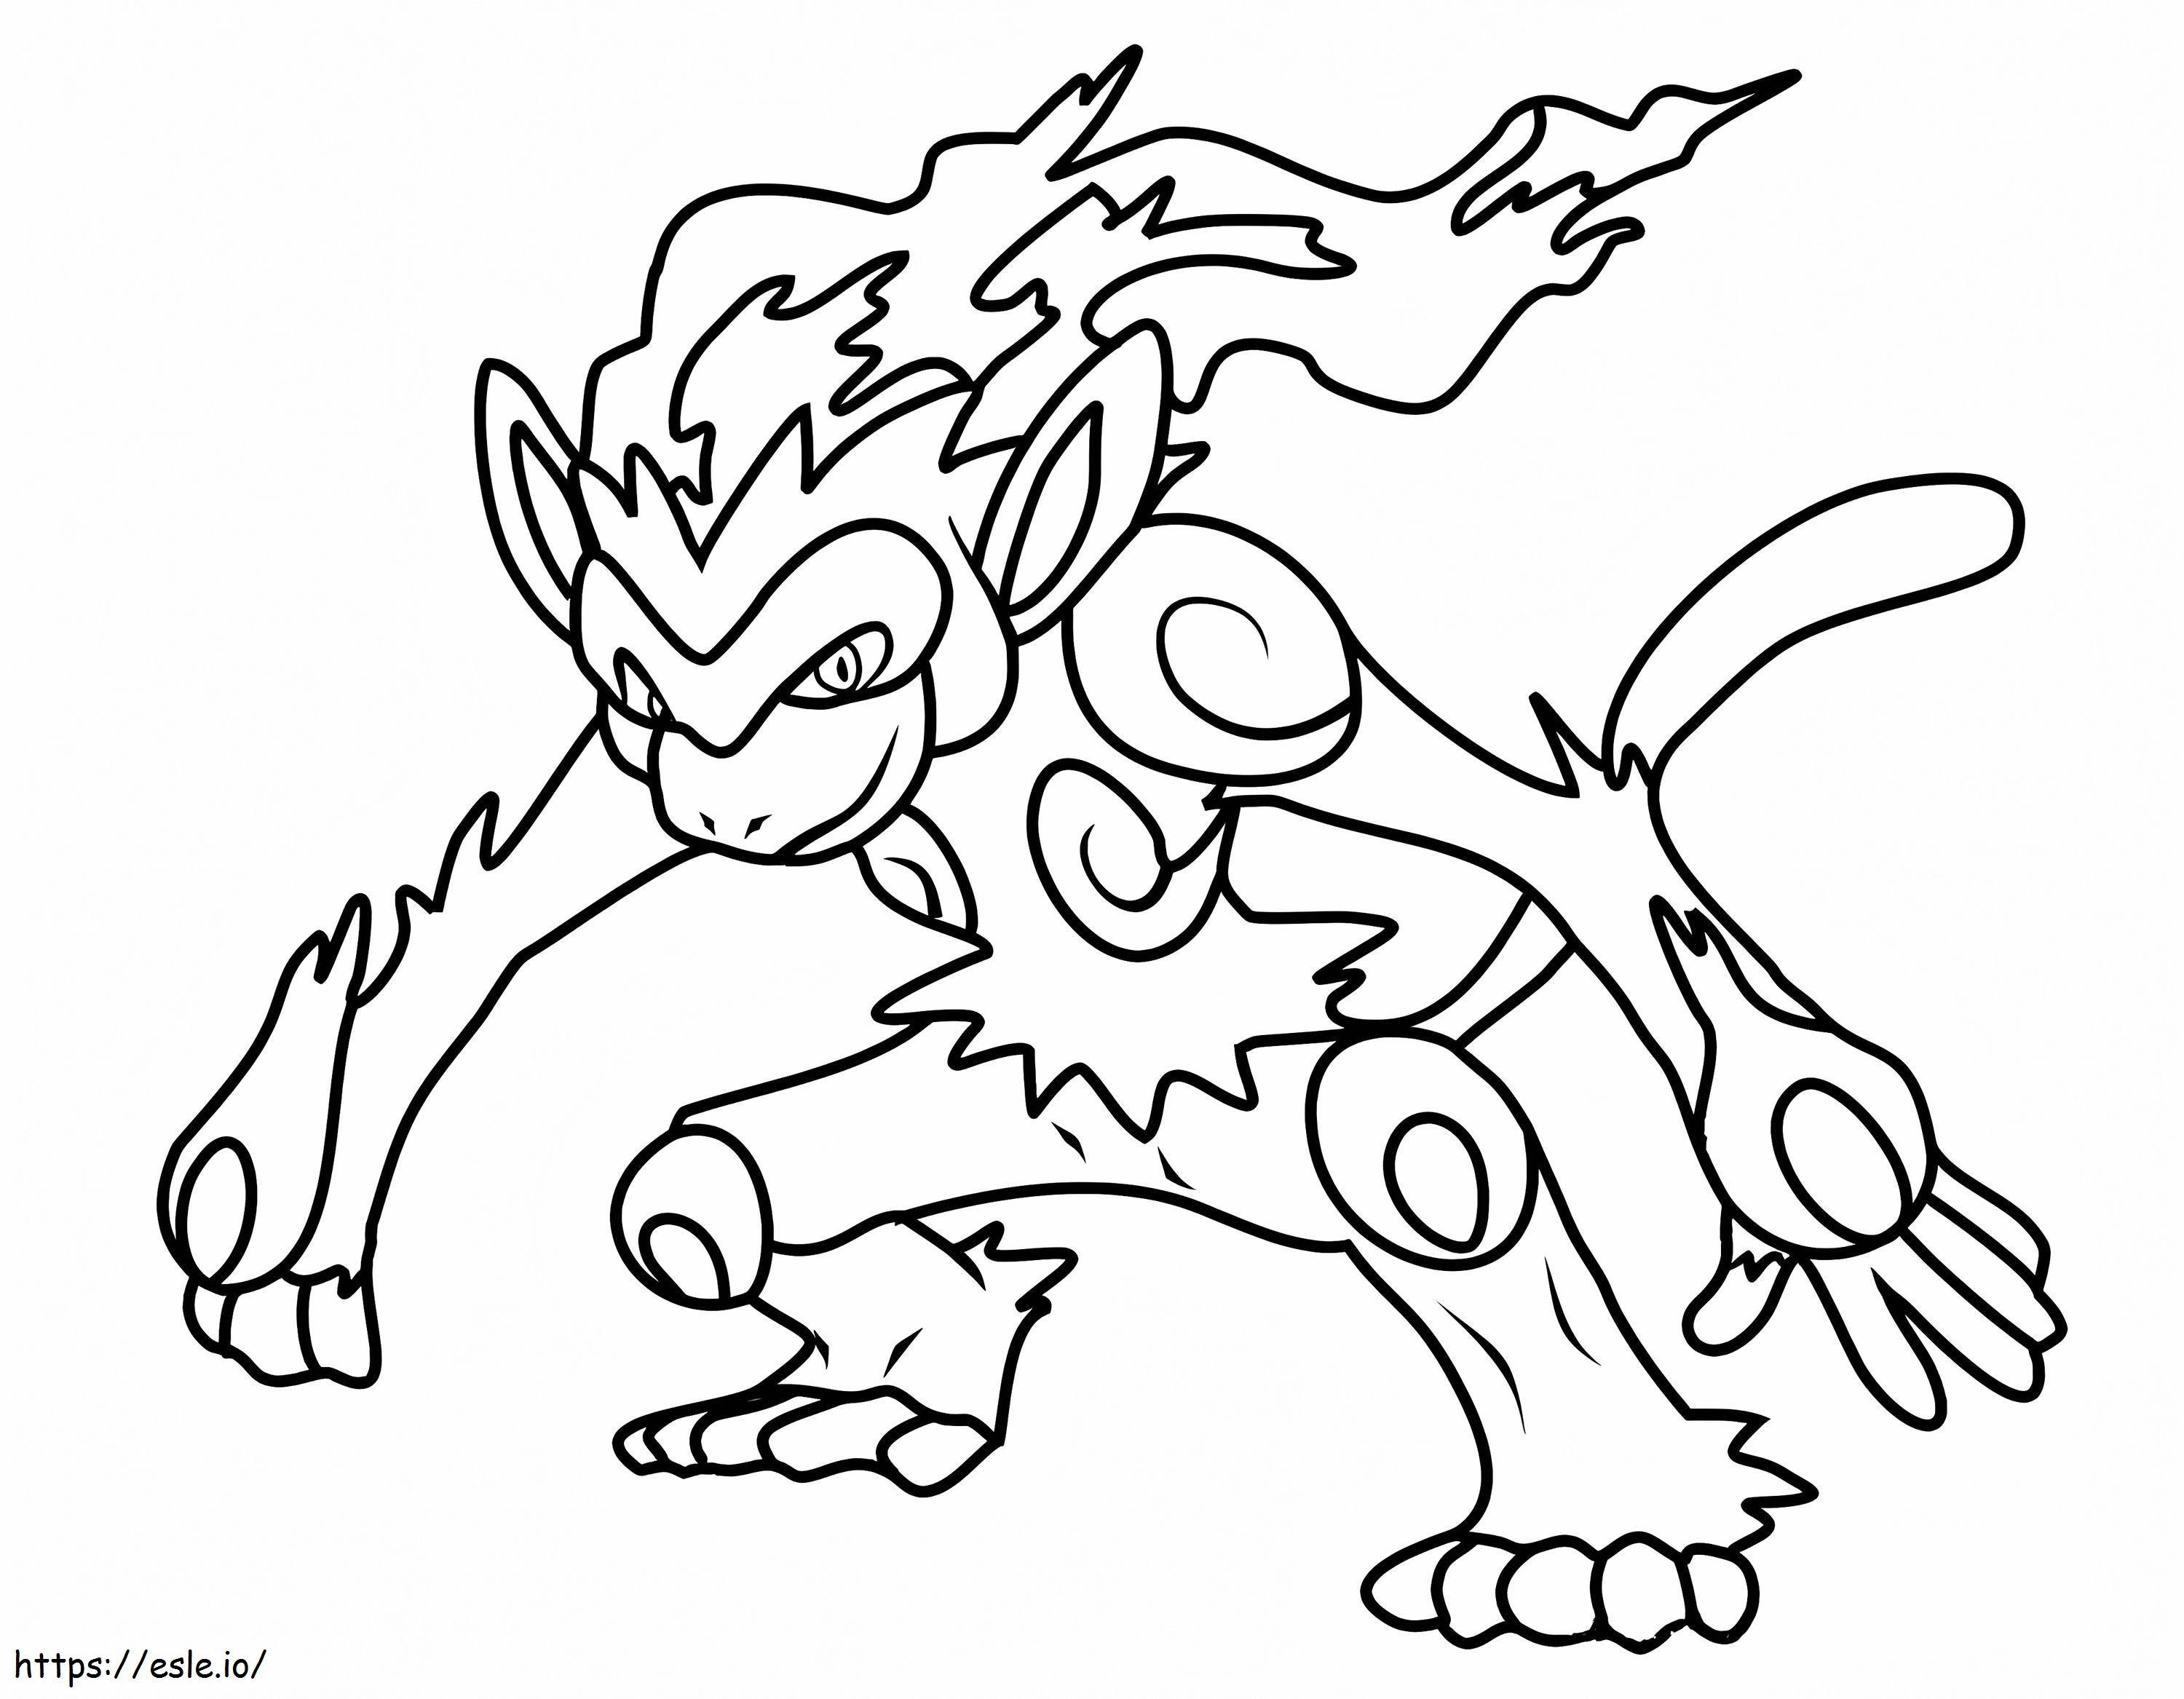 Official Infernape Pokemon coloring page